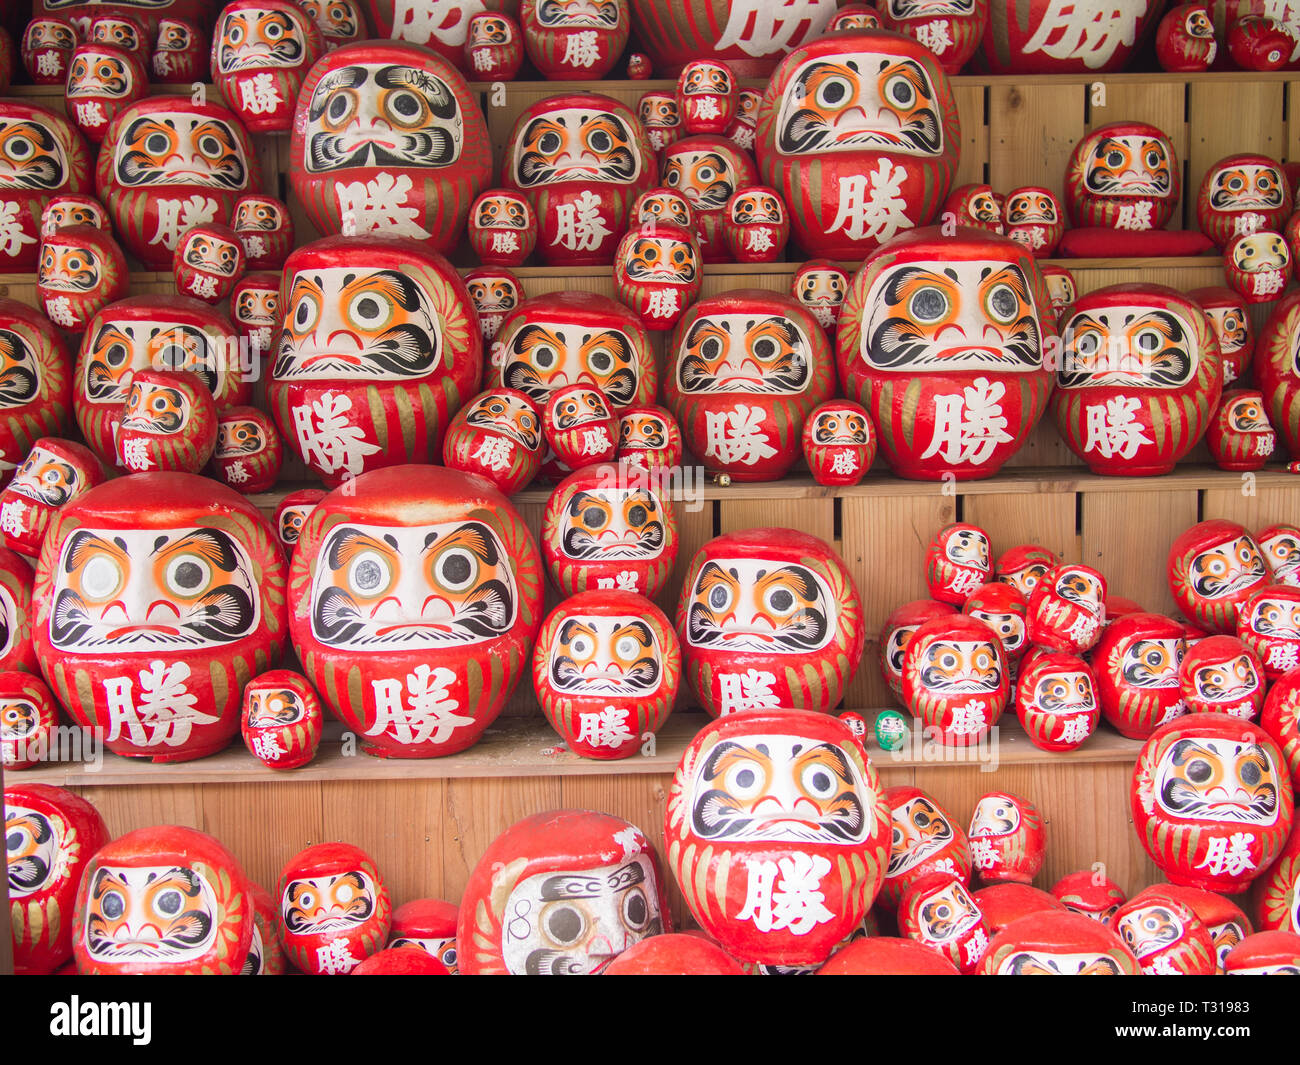 Daruma dolls at Katsuo-ji in Osaka Japan. People left these dolls at the temple ground hoping to obtain luck. Stock Photo